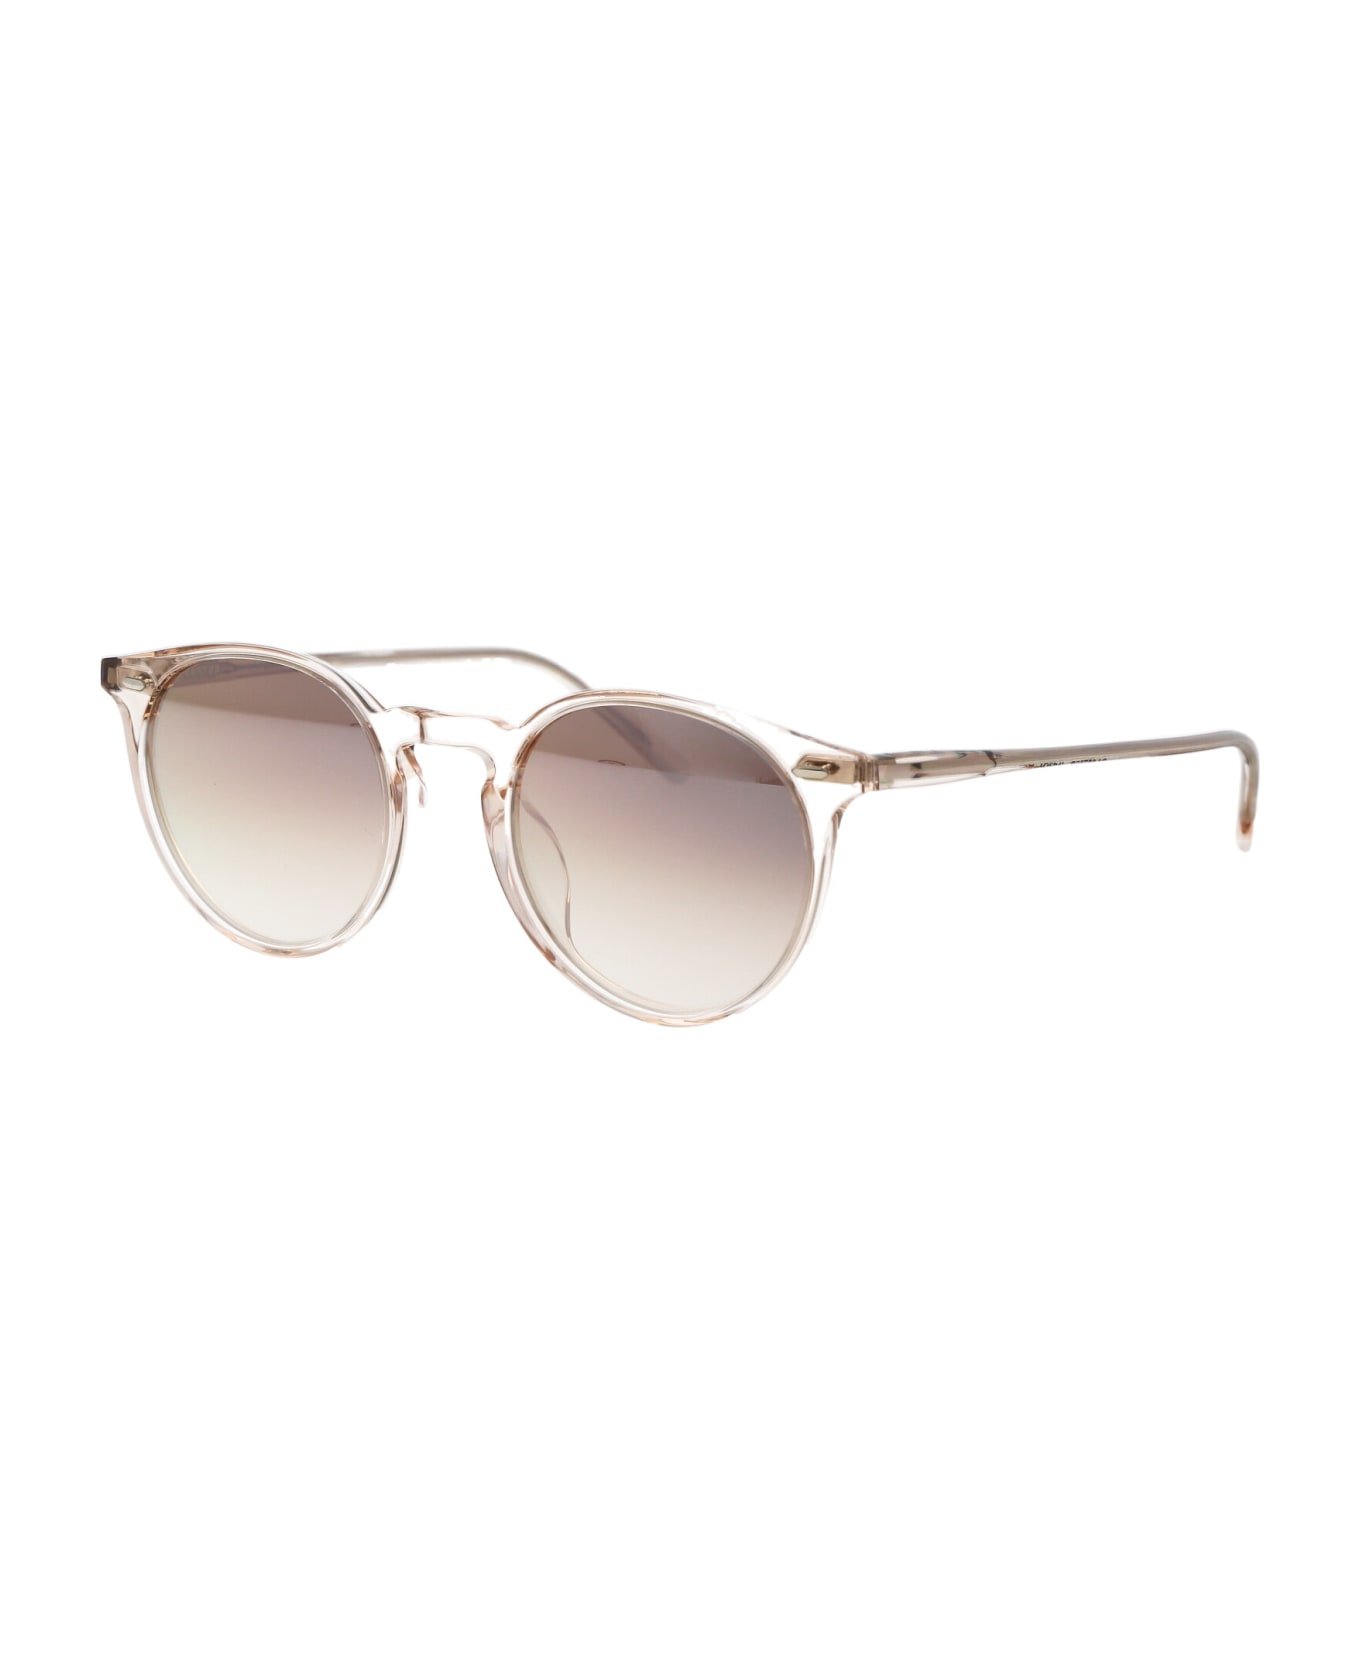 Oliver Peoples N.02 Sun Sunglasses - 1743Q1 Cherry Blossom